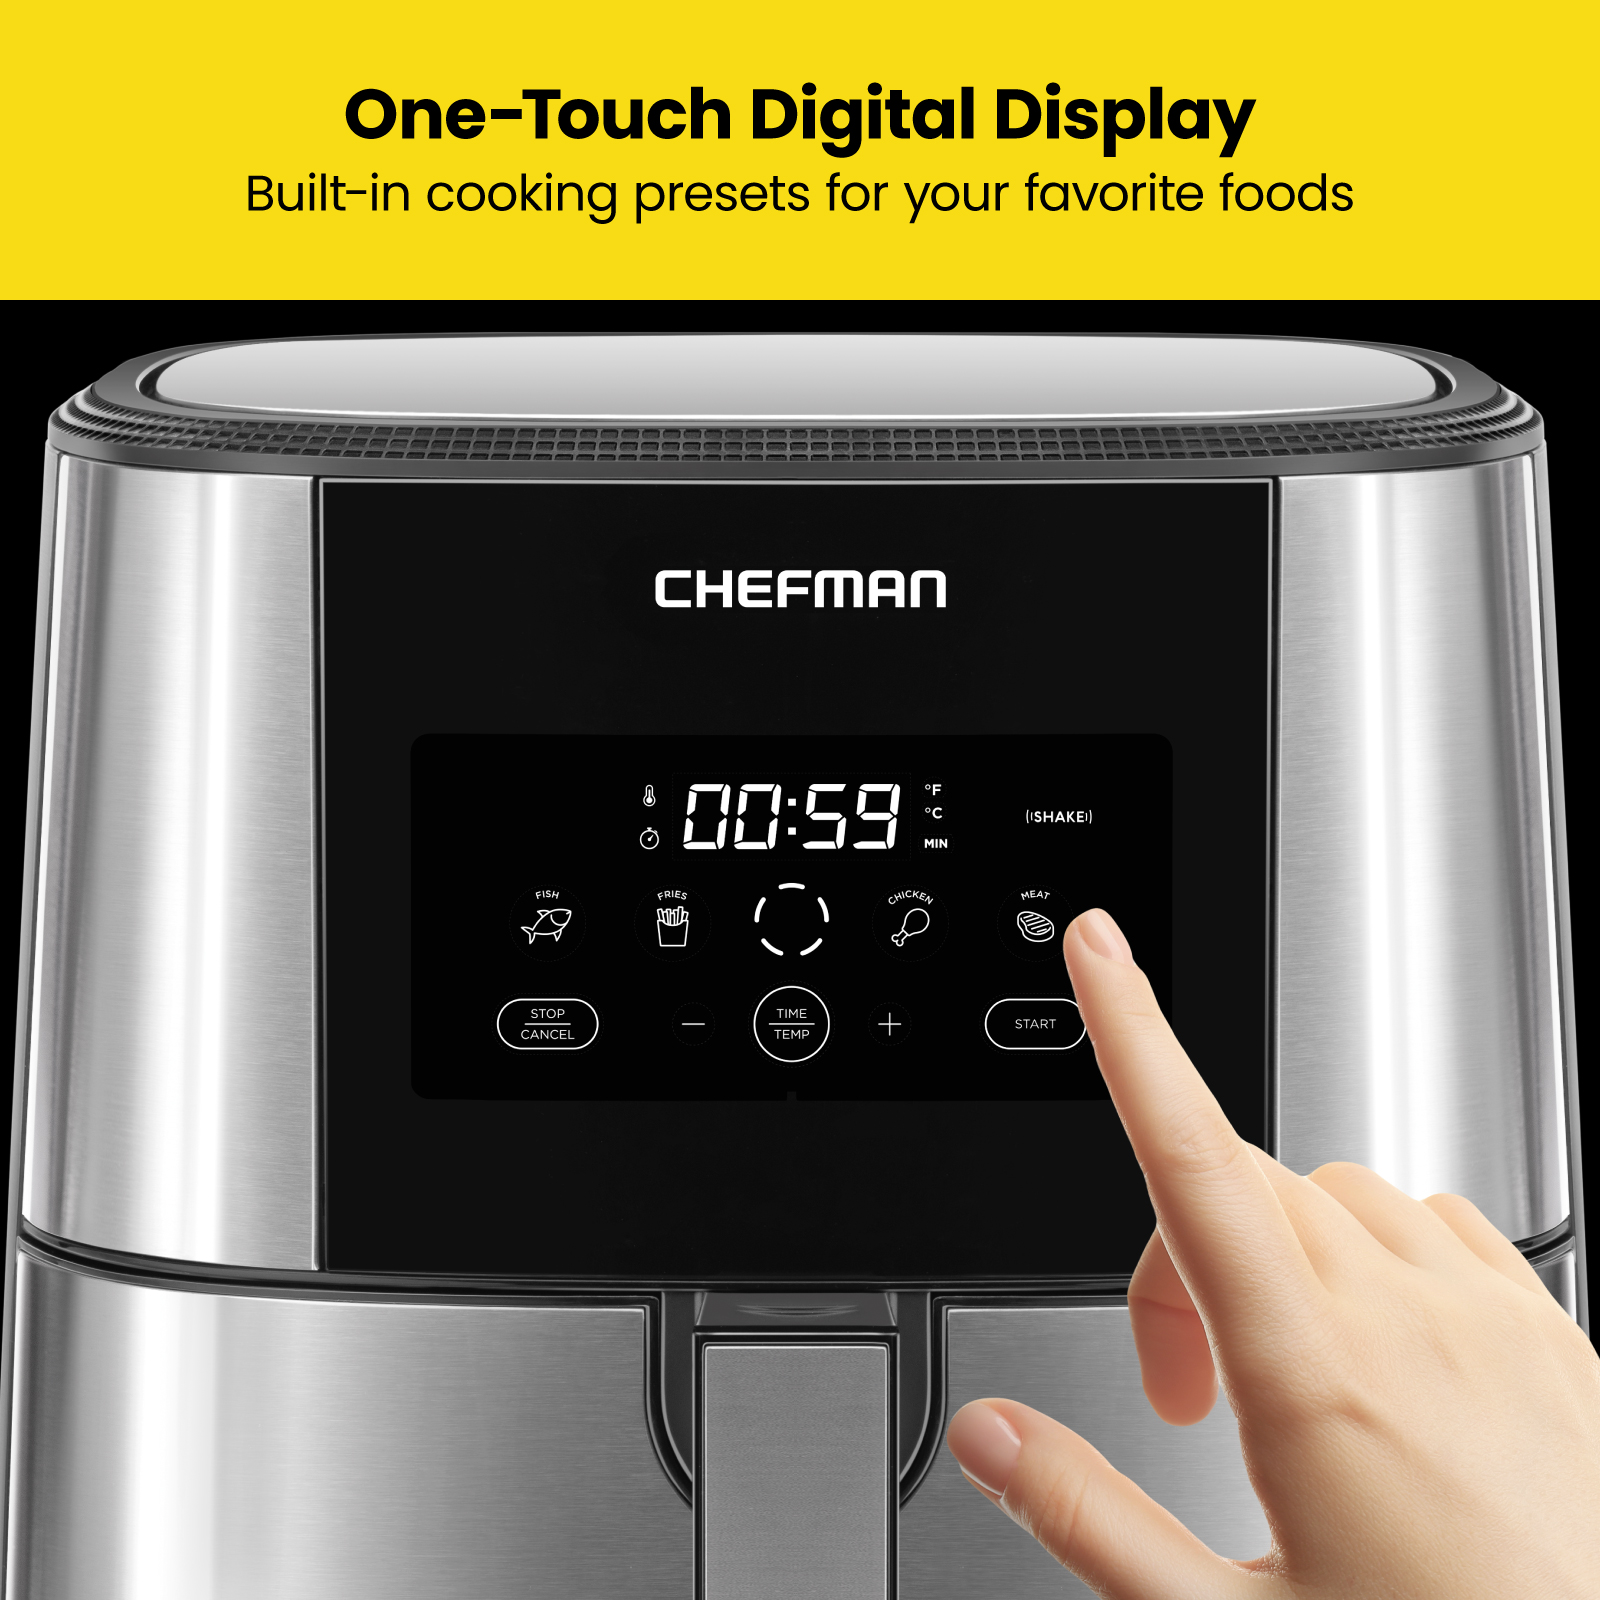 Chefman Turbofry Air Fryer w/ Digital Controls, 8 Qt Capacity - Stainless Steel, New - image 6 of 7